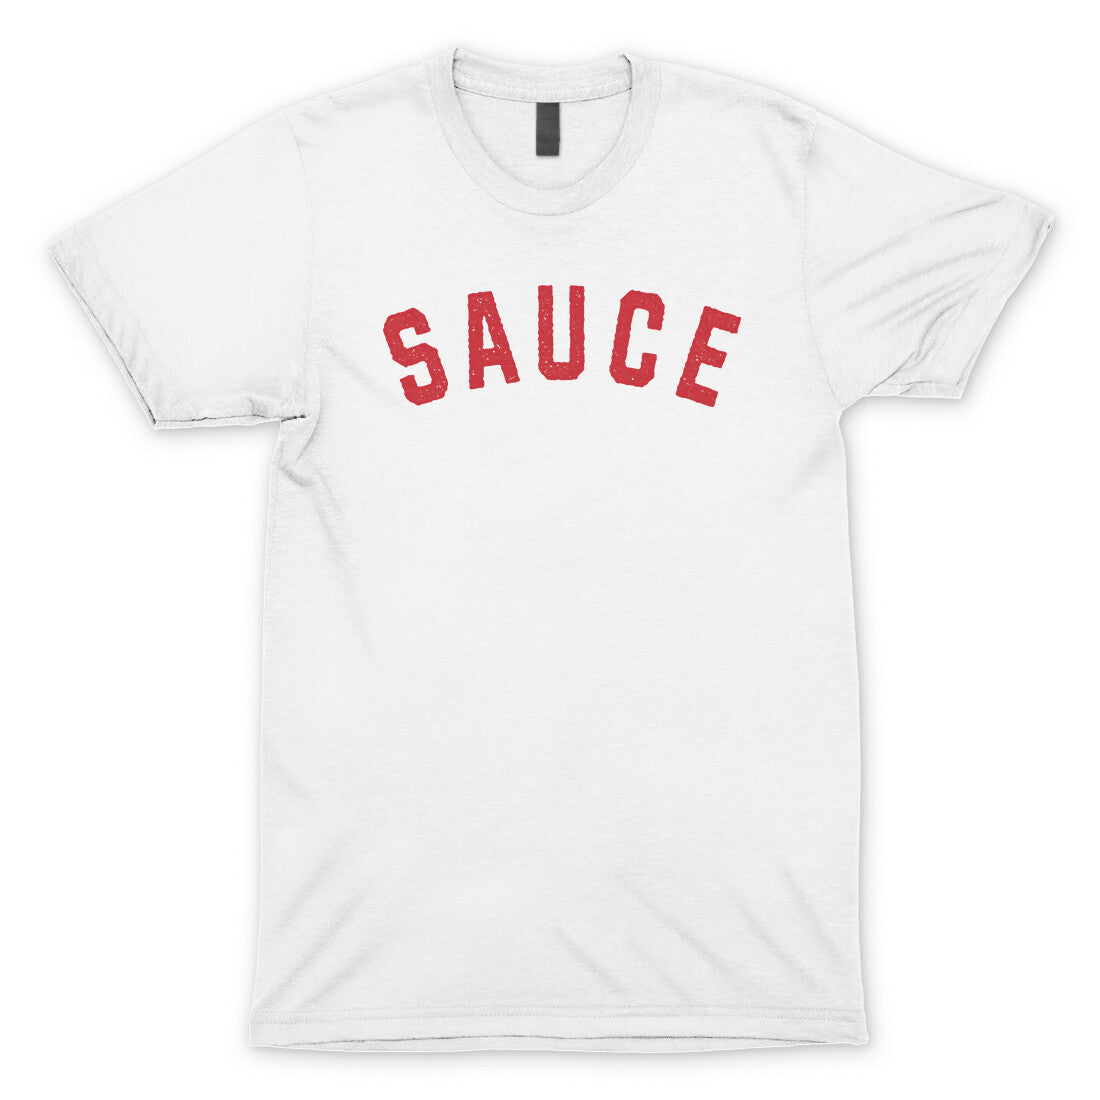 Sauce in White Color